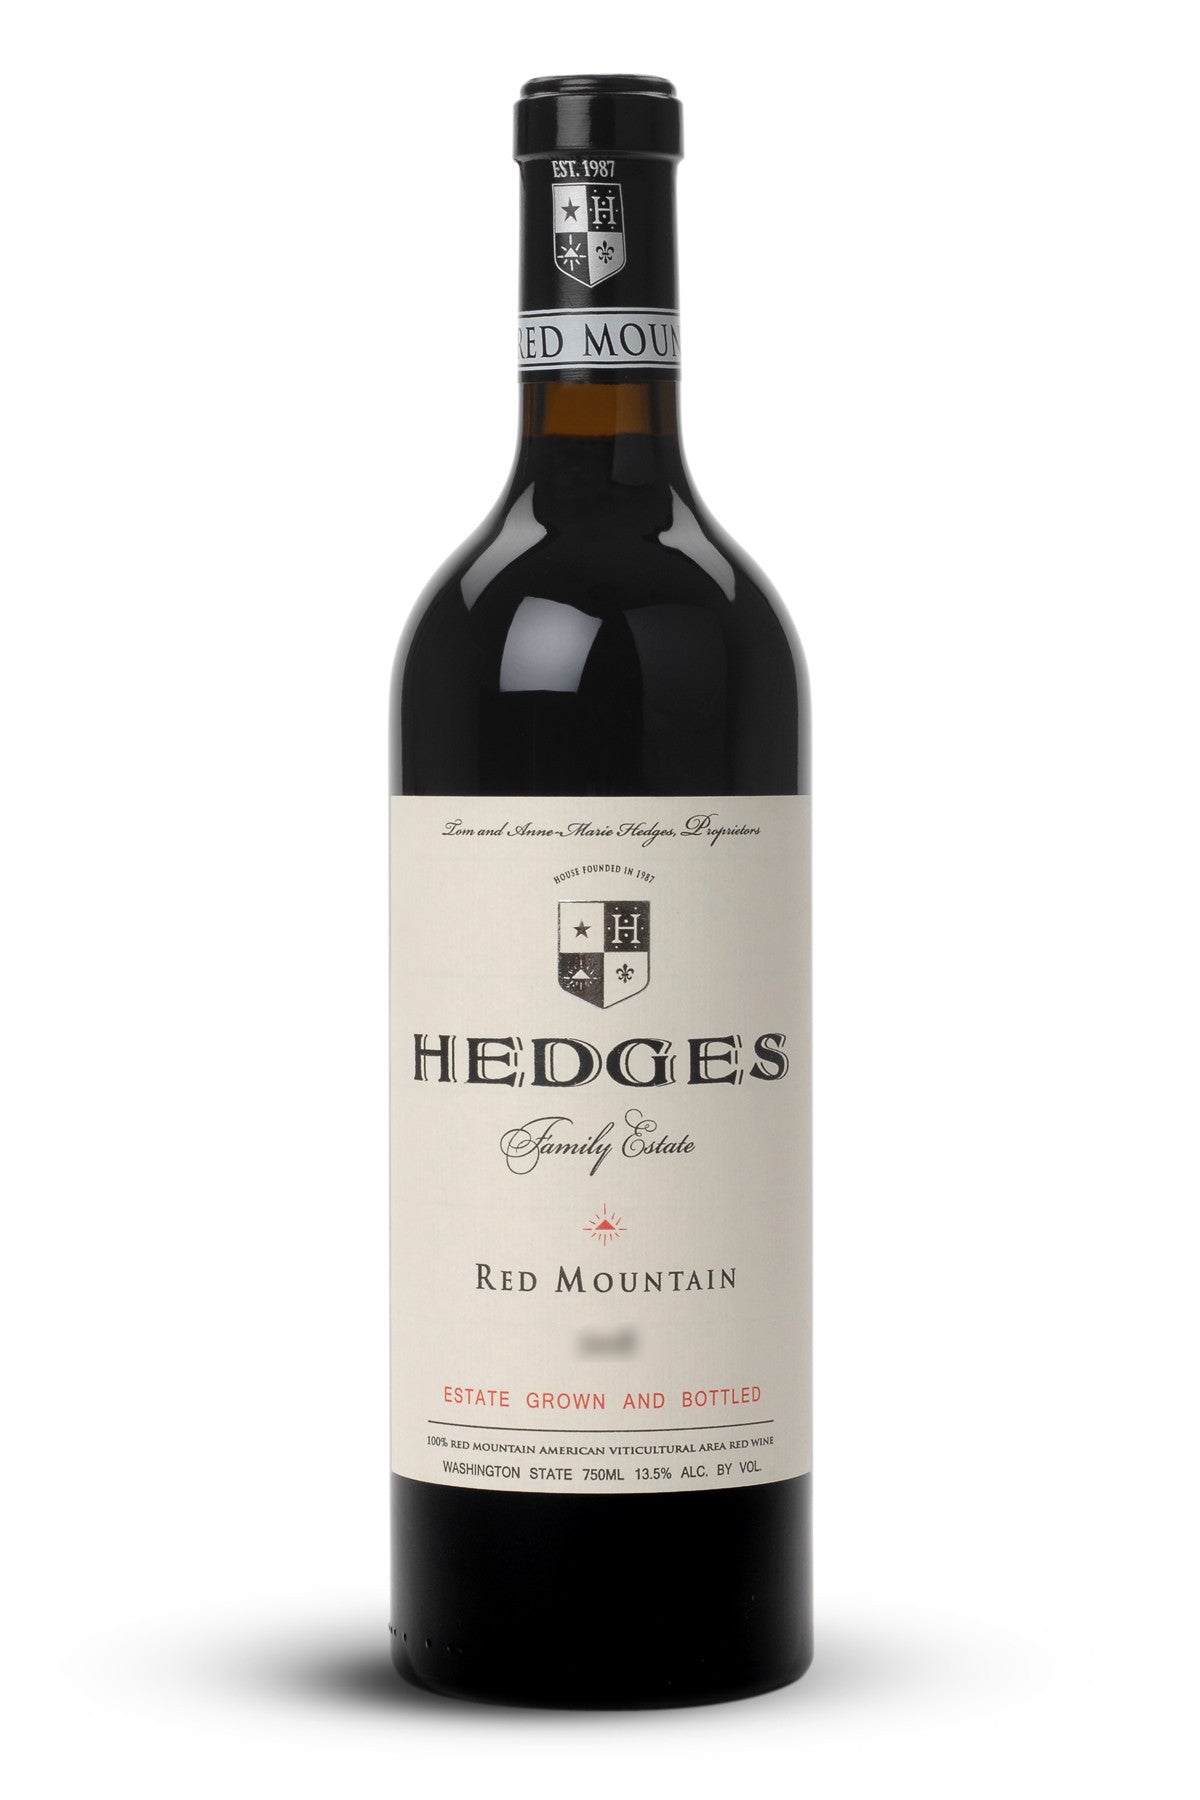 Hedges - Red Mountain 2011